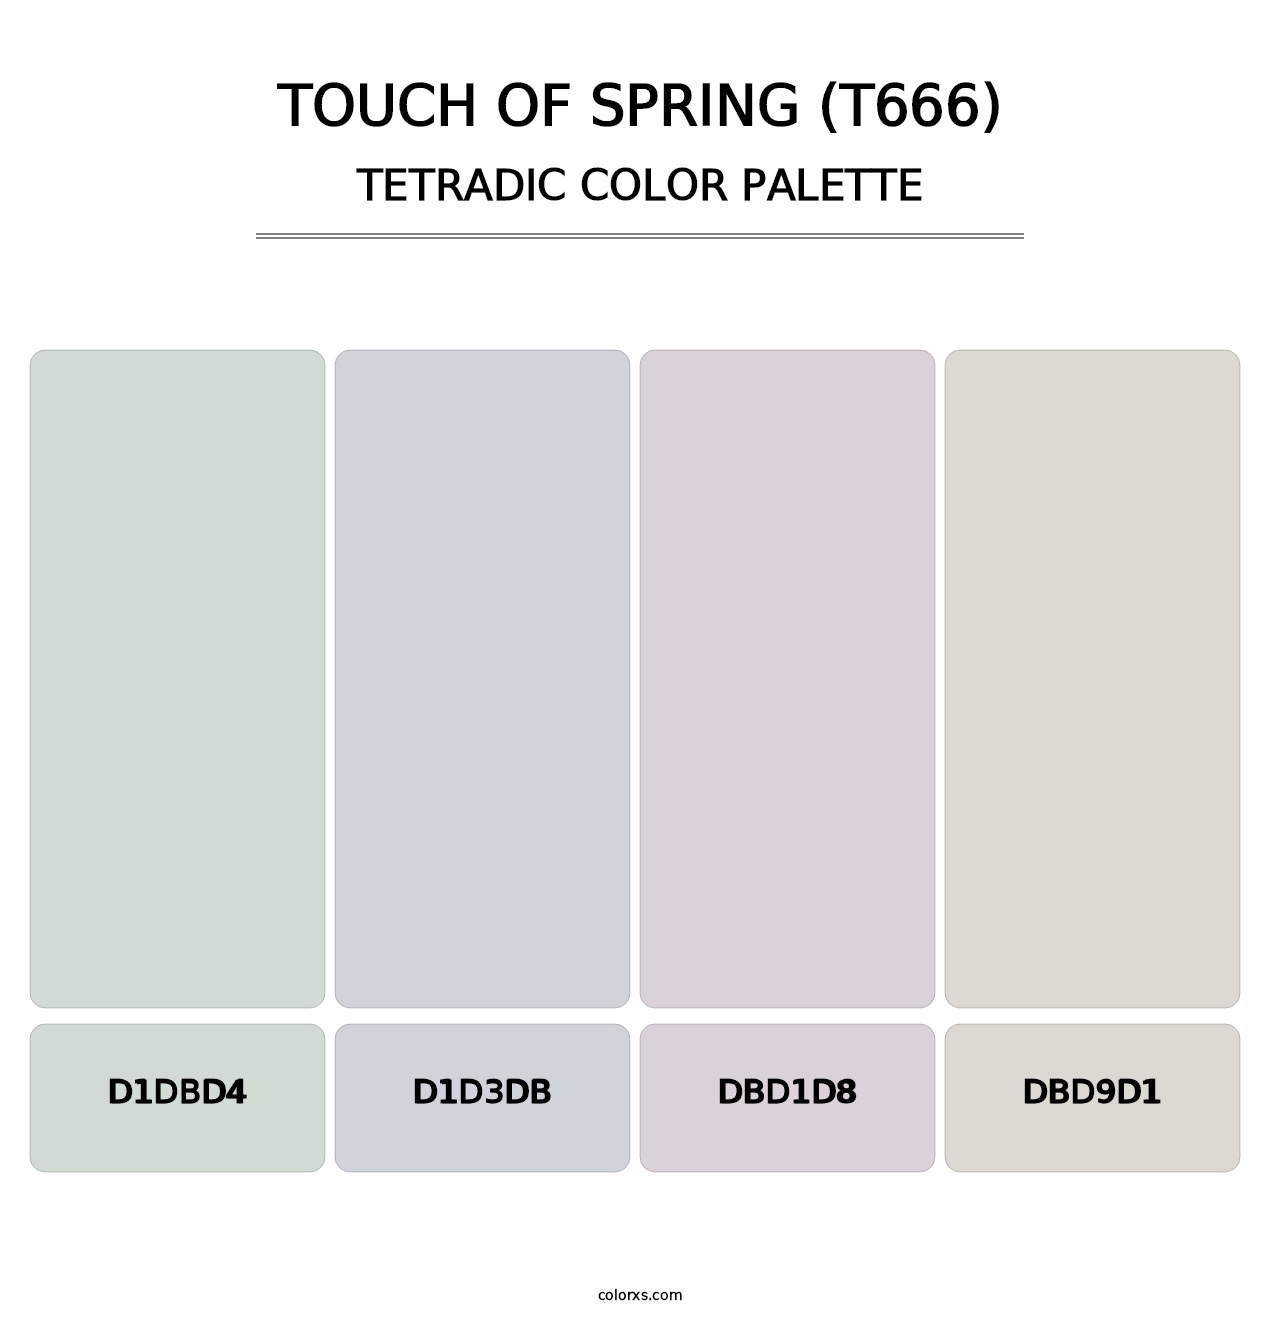 Touch of Spring (T666) - Tetradic Color Palette